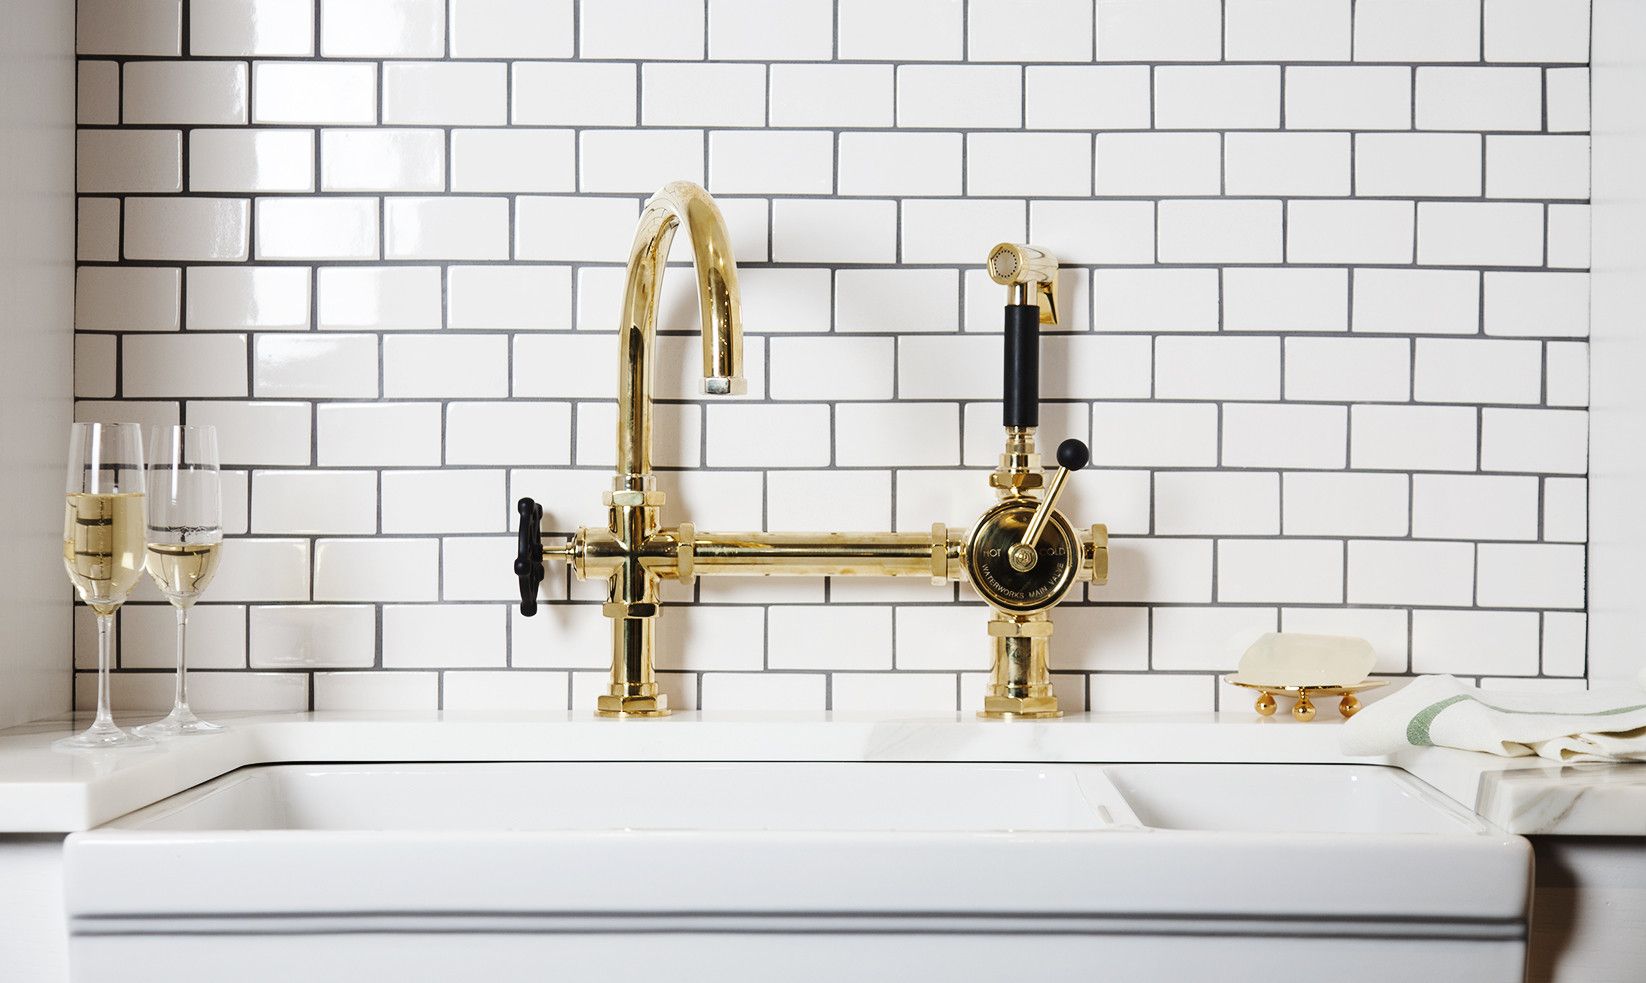 Brass Faucets Market Report By Product Type, By Application, By Region Analysis & Forecast 2018-2024